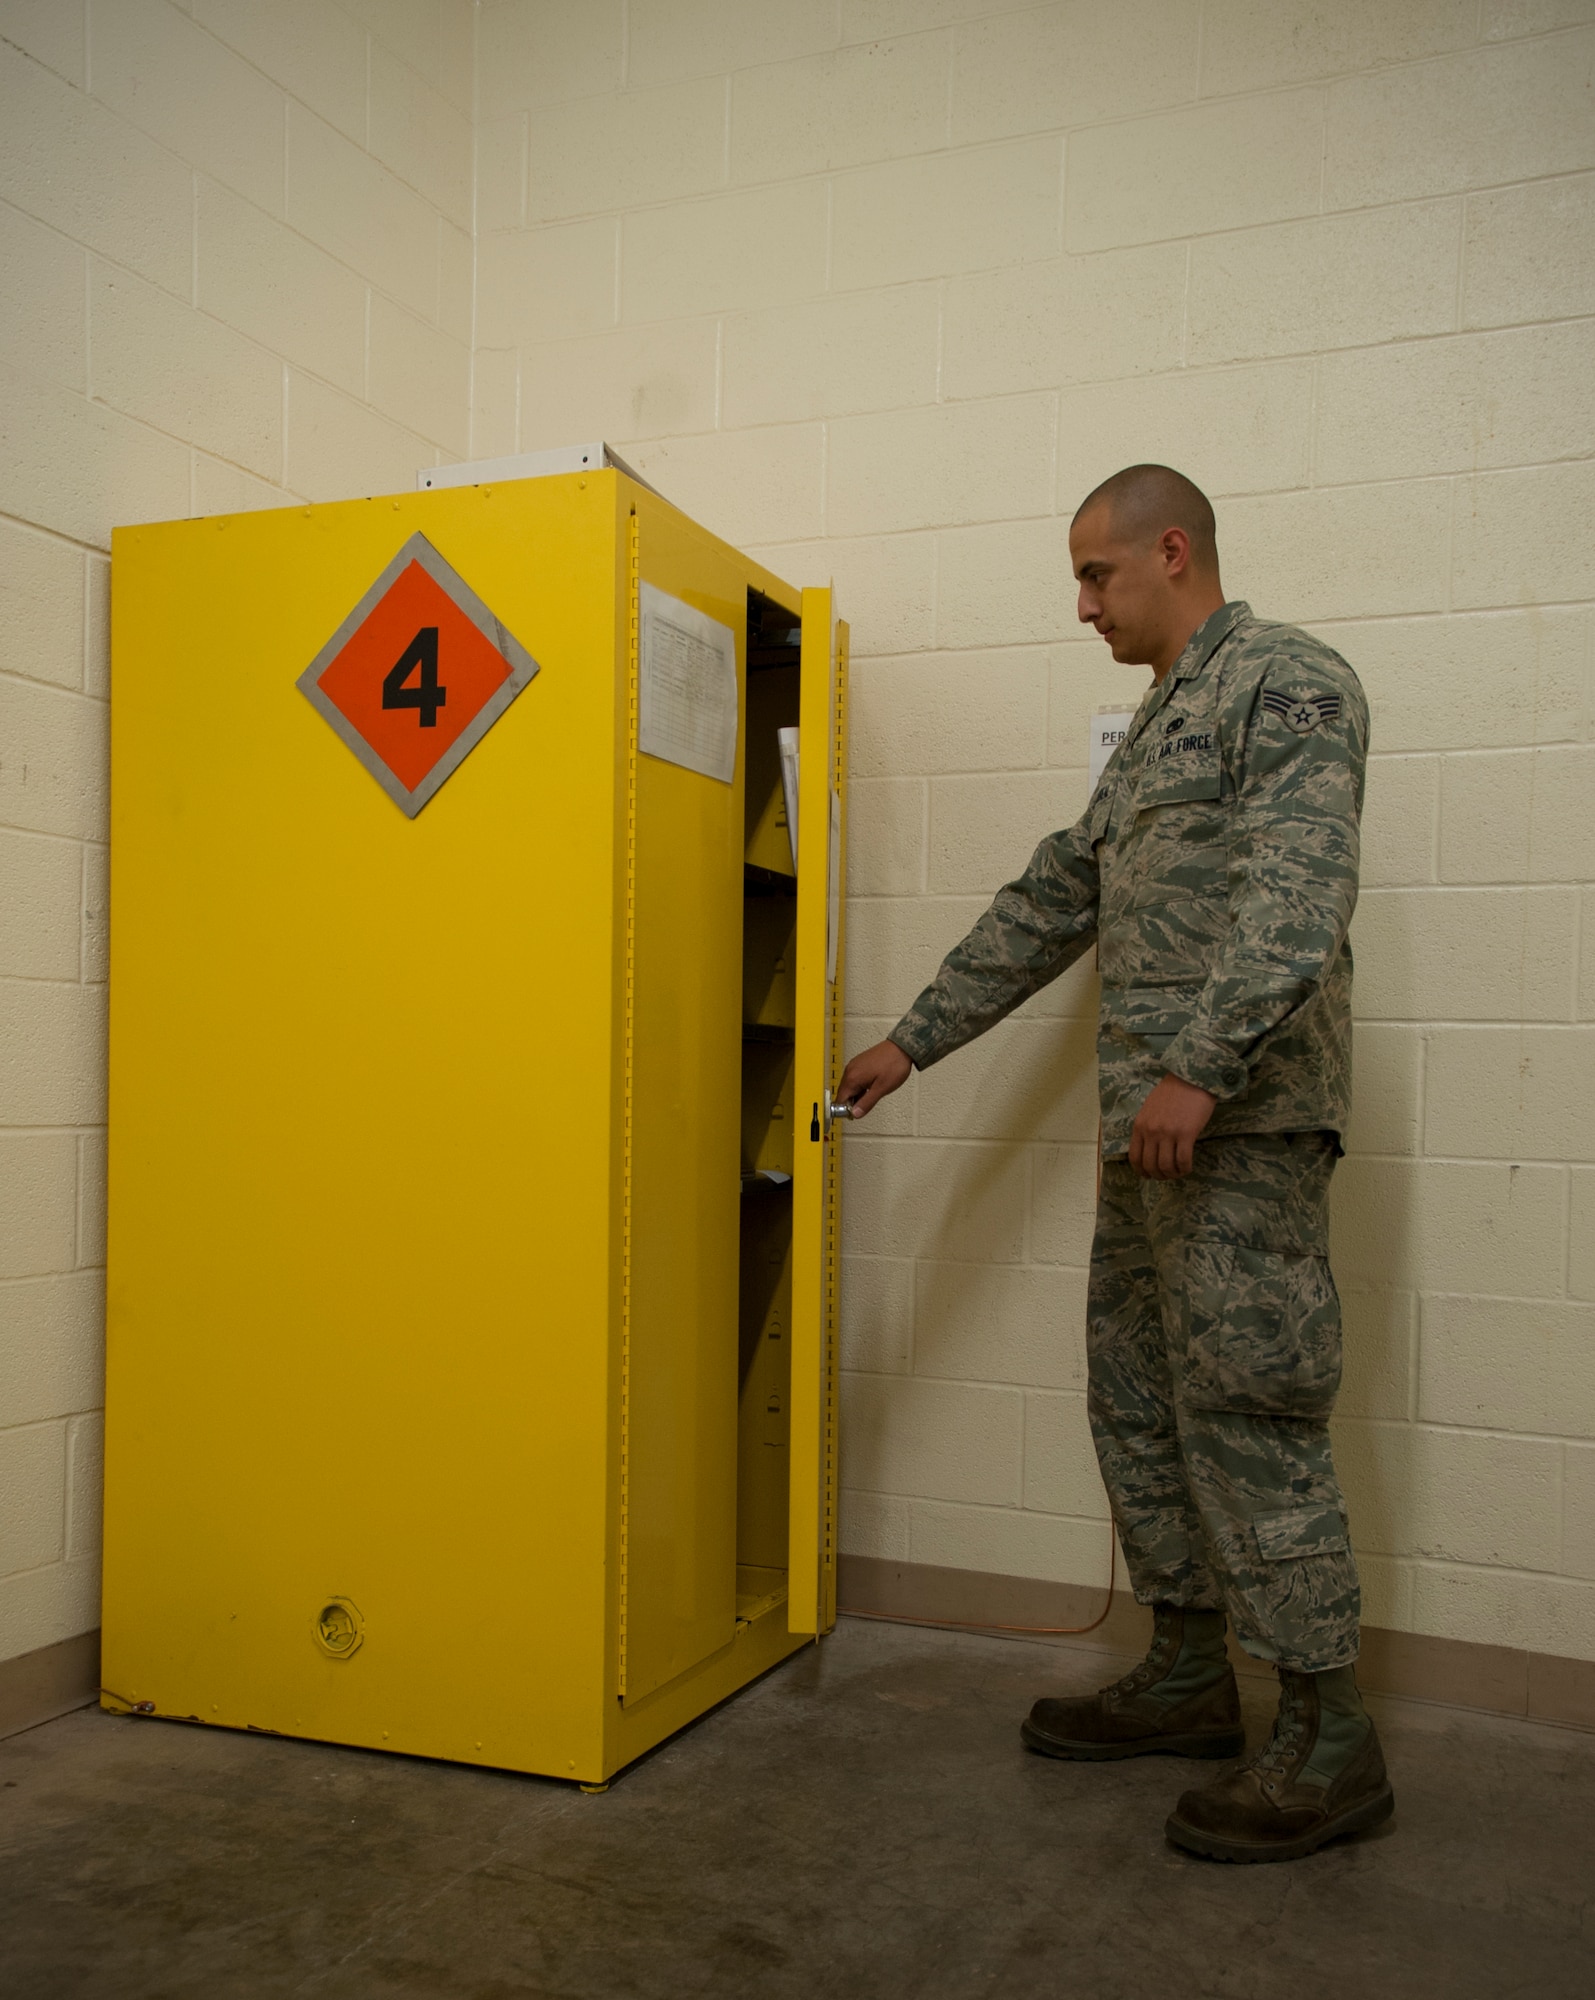 Senior Airman John Villarreal, 7th Aircraft Maintenance Squadron, goes through safety procedures before handling squibs, an electrically fired explosive, May 14, 2013, at Dyess Air Force Base, Texas. The 7th AMXS's electrical and environmental shop was recently awarded the 12th Air Force Unit Safety Award of Distinction due to the combined efforts of their unit weapons safety representatives. Senior Airmen John Villarreal, Jacob Gillen and Andrew Smith, 7th AMXS, implemented a safer way to handle squibs. In doing so, they improved workplace safety for all personnel assigned to the electrical and environmental shop. (U.S. Air Force photo by Senior Airman Jonathan Stefanko/Released)